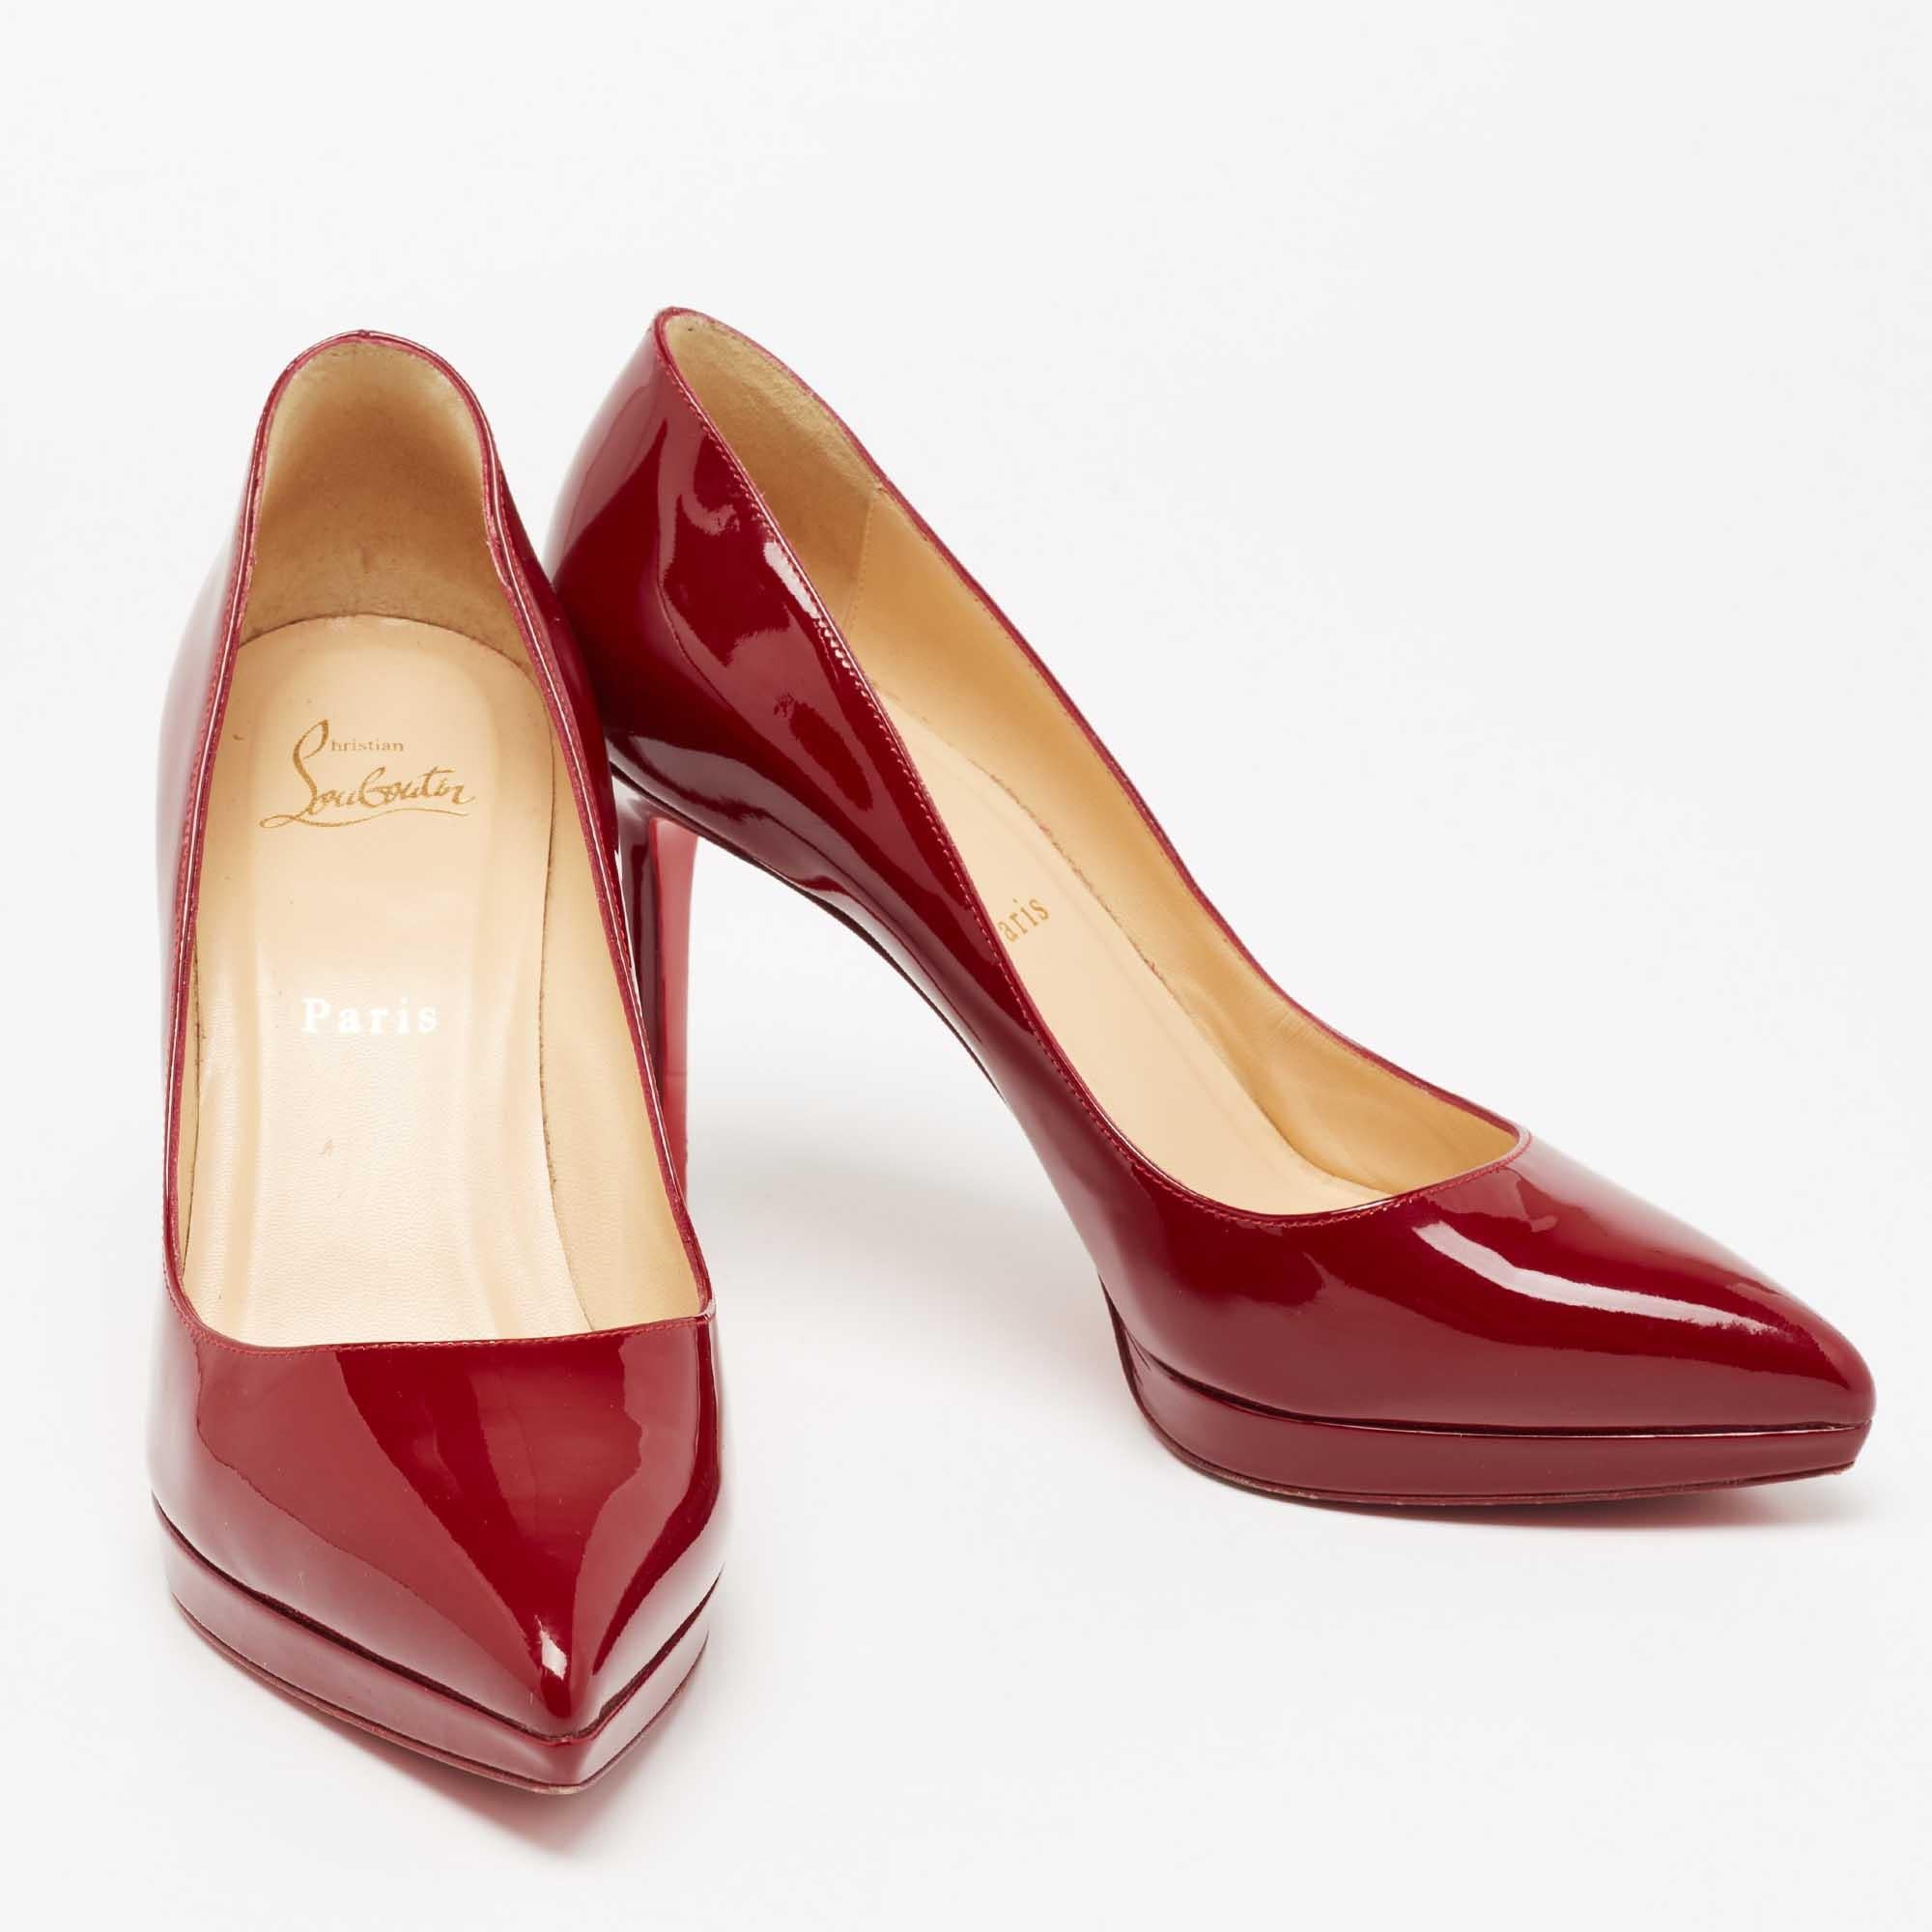 The alluring design and a burgundy hue of these Christian Louboutin Pigalle Plato pumps make the pair a must-have. Crafted skilfully, these pumps are set on a durable platform base and comfortable heel. Choose this finely-designed pair of pumps to